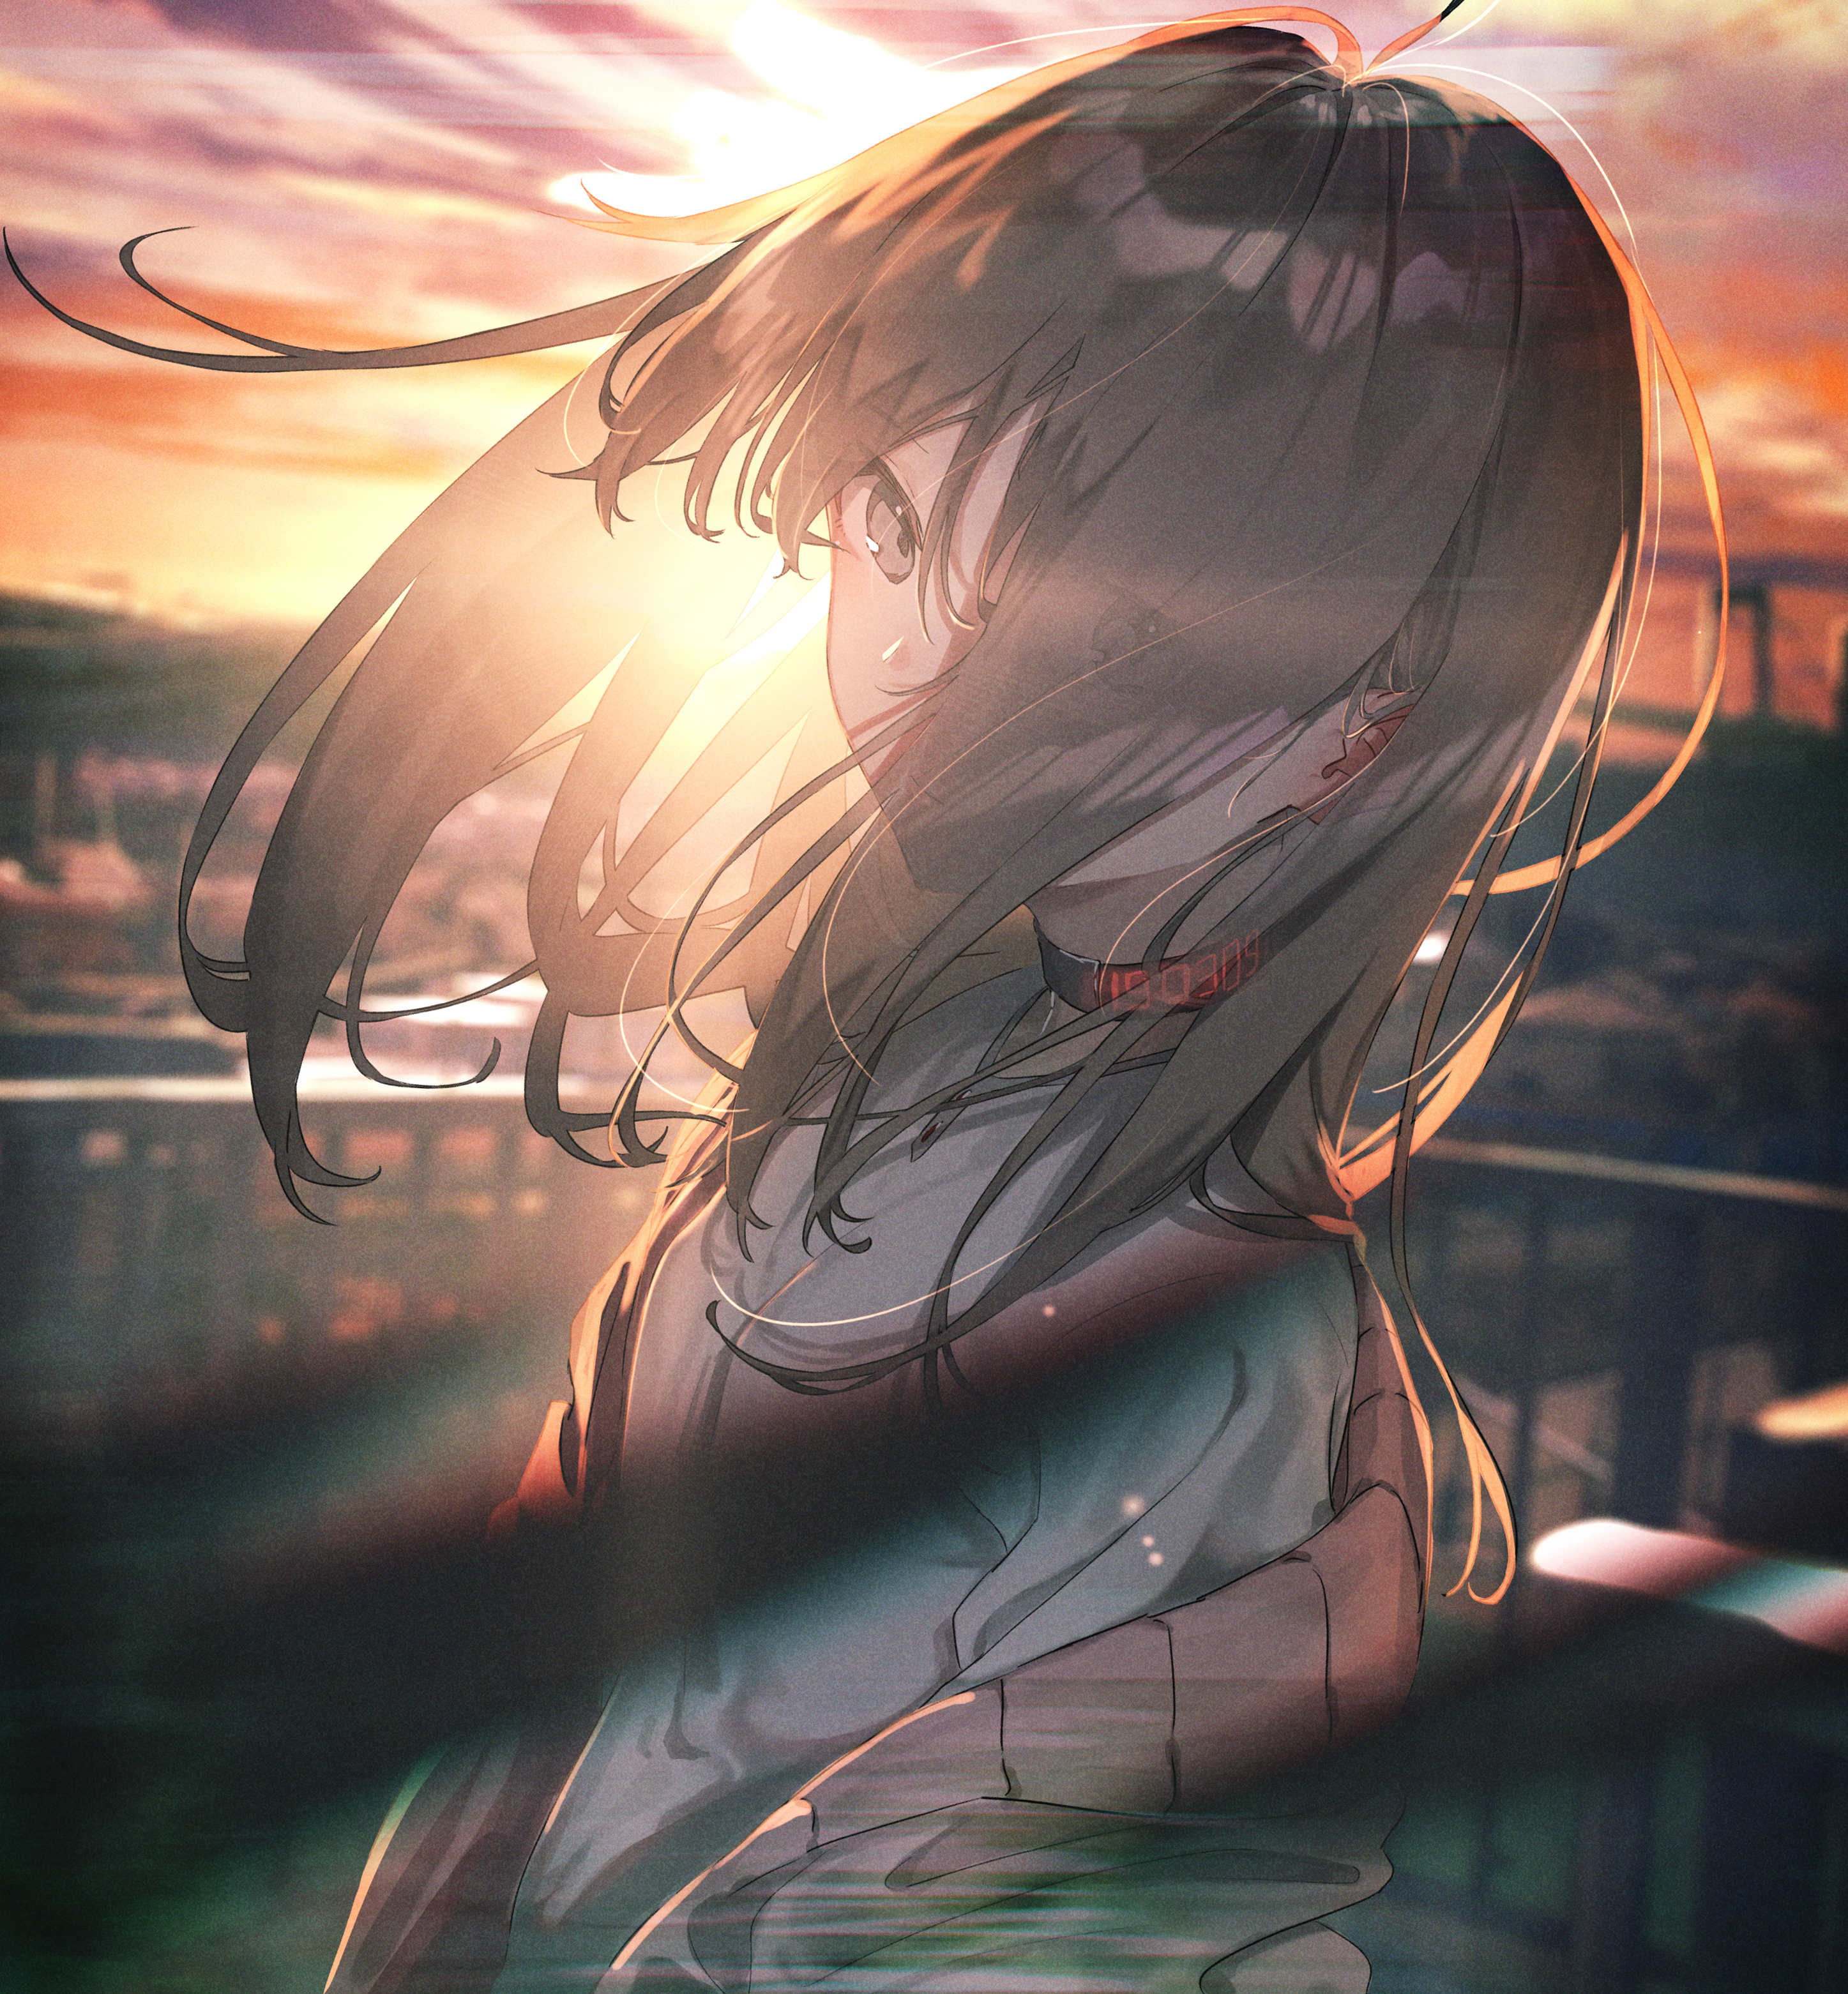 Anime 2894x3123 anime girls original characters brunette long hair hair in face looking at viewer necklace T-shirt sweater artwork digital art drawing illustration 2D portrait backlighting lens flare sunset depth of field Rolua Noa anime